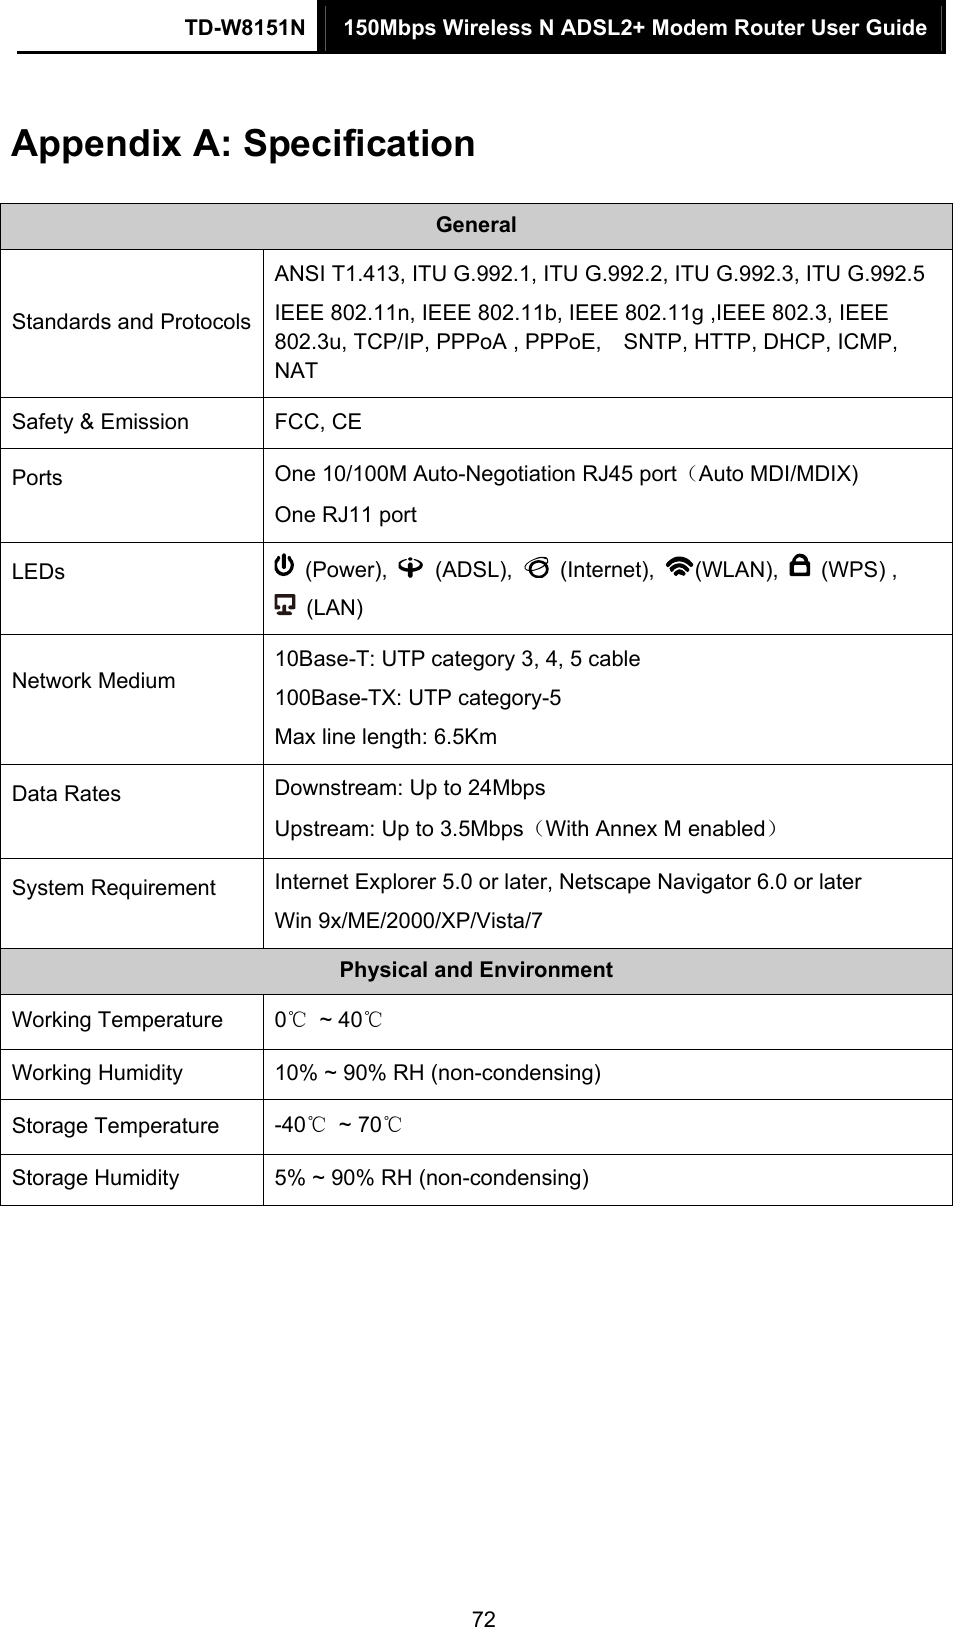 TD-W8151N  150Mbps Wireless N ADSL2+ Modem Router User Guide  72Appendix A: Specification General Standards and Protocols ANSI T1.413, ITU G.992.1, ITU G.992.2, ITU G.992.3, ITU G.992.5 IEEE 802.11n, IEEE 802.11b, IEEE 802.11g ,IEEE 802.3, IEEE 802.3u, TCP/IP, PPPoA , PPPoE,    SNTP, HTTP, DHCP, ICMP, NAT Safety &amp; Emission  FCC, CE Ports  One 10/100M Auto-Negotiation RJ45 port（Auto MDI/MDIX) One RJ11 port LEDs   (Power),   (ADSL),   (Internet),  (WLAN),   (WPS) ,  (LAN) Network Medium 10Base-T: UTP category 3, 4, 5 cable 100Base-TX: UTP category-5 Max line length: 6.5Km Data Rates  Downstream: Up to 24Mbps Upstream: Up to 3.5Mbps（With Annex M enabled） System Requirement  Internet Explorer 5.0 or later, Netscape Navigator 6.0 or later Win 9x/ME/2000/XP/Vista/7 Physical and Environment Working Temperature  0℃ ~ 40℃ Working Humidity  10% ~ 90% RH (non-condensing) Storage Temperature  -40℃ ~ 70℃ Storage Humidity  5% ~ 90% RH (non-condensing)  